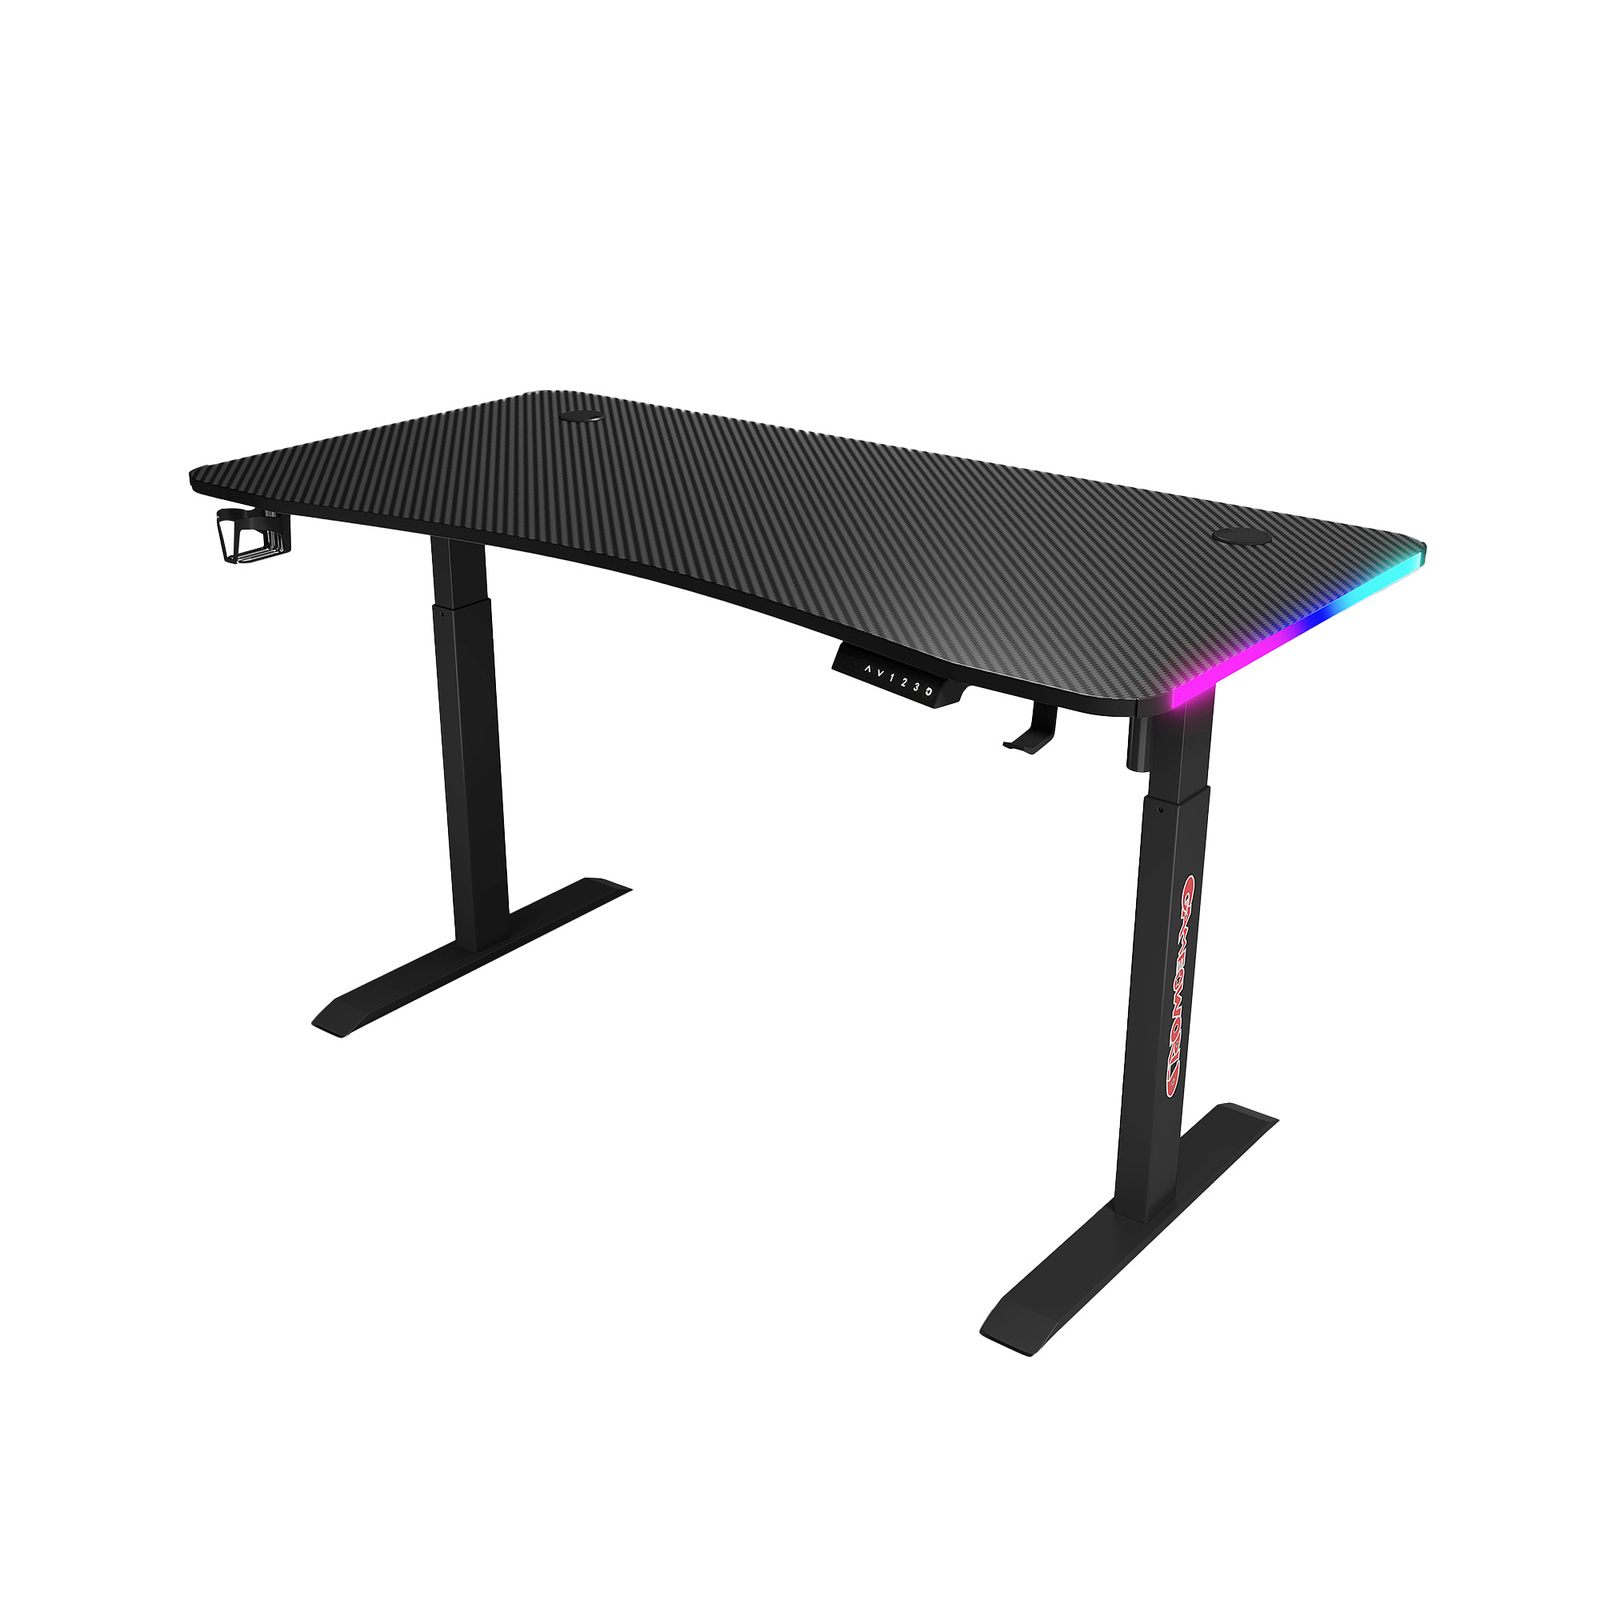 160cm RGB LED Gaming Desk Single Motor Frame Leg with Cup and Headphone Holder